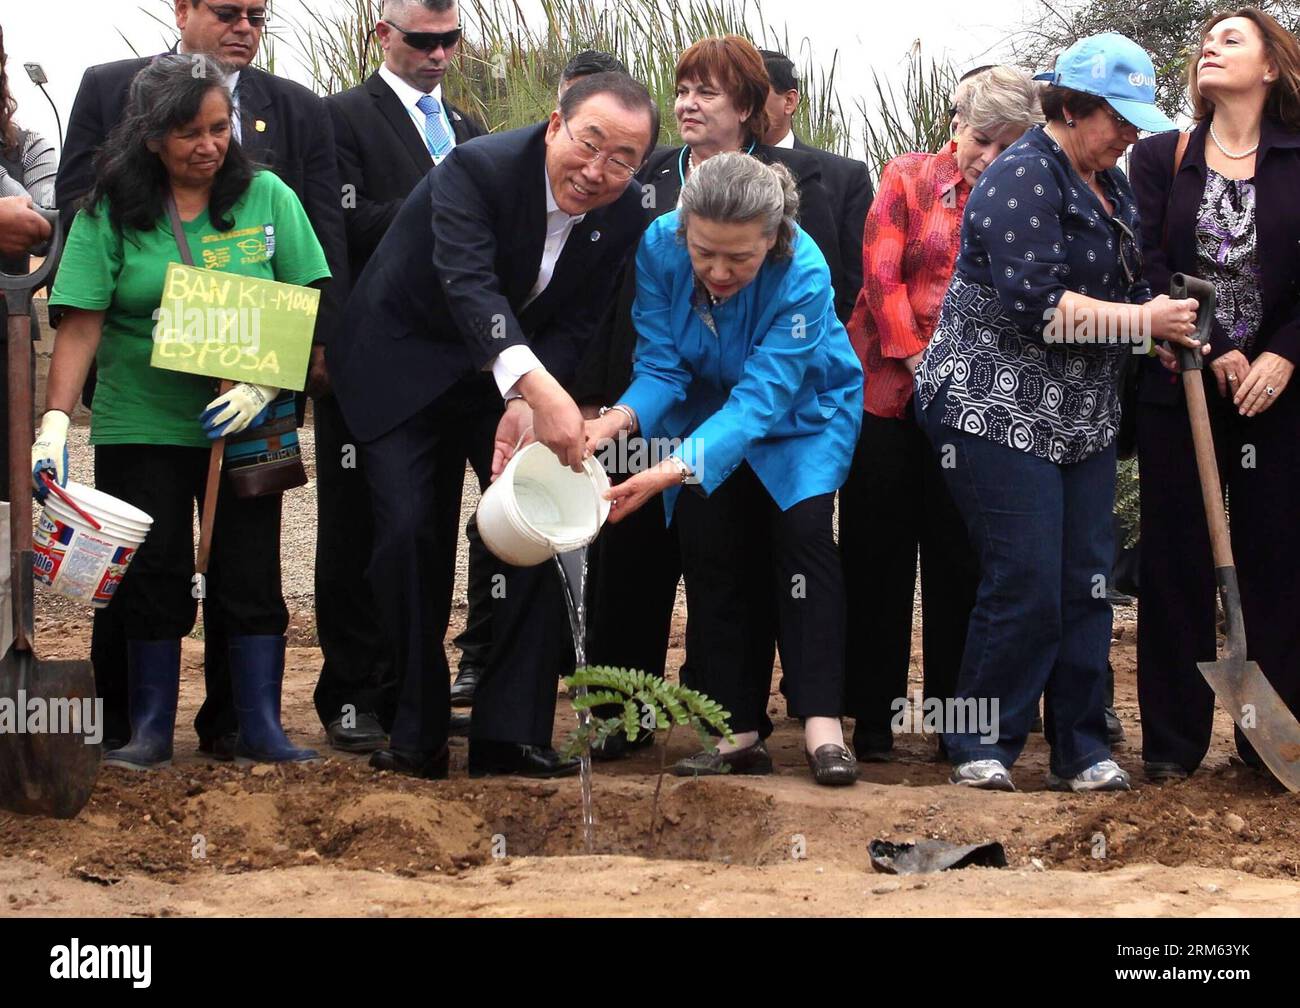 Bildnummer: 60791051  Datum: 03.12.2013  Copyright: imago/Xinhua     (131203) -- LIMA, Dec. 3, 2013 (Xinhua) -- United Nations Secretary General Ban Ki-moon and his wife Yoo Soon-taek plant a tree during their visit to a reforestation project in the El Agustino district of Lima, capita of Peru, on Dec. 3, 2013. Ban Ki-moon is on visit to Lima to attend the 15th Session of the United Nations Industrial Development Organization (UNIDO) General Conference meeting that ends on Dec. 6. (Xinhua/Vidal Tarqui) PERU-LIMA-UN-BAN KI-MOON-VISIT PUBLICATIONxNOTxINxCHN People Politik x0x xkg 2013 quer premi Stock Photo